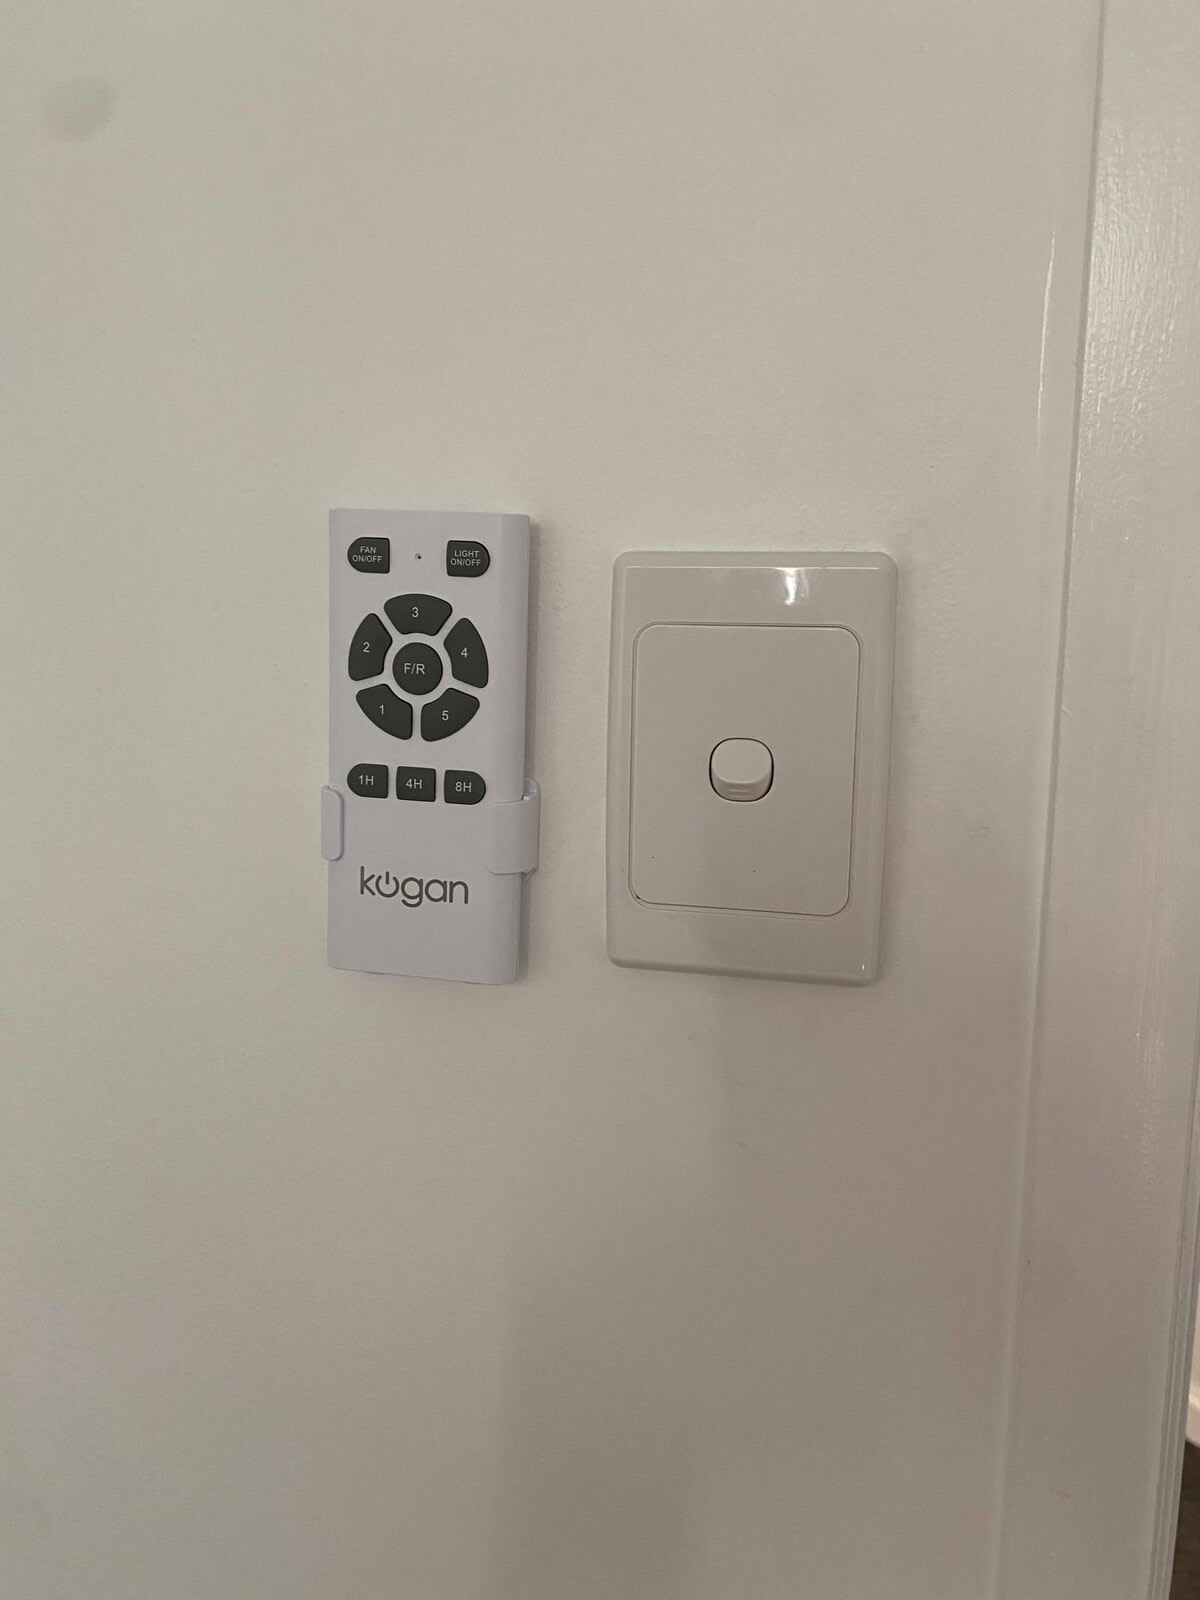 Ceiling fan and light switch is installed in each unit